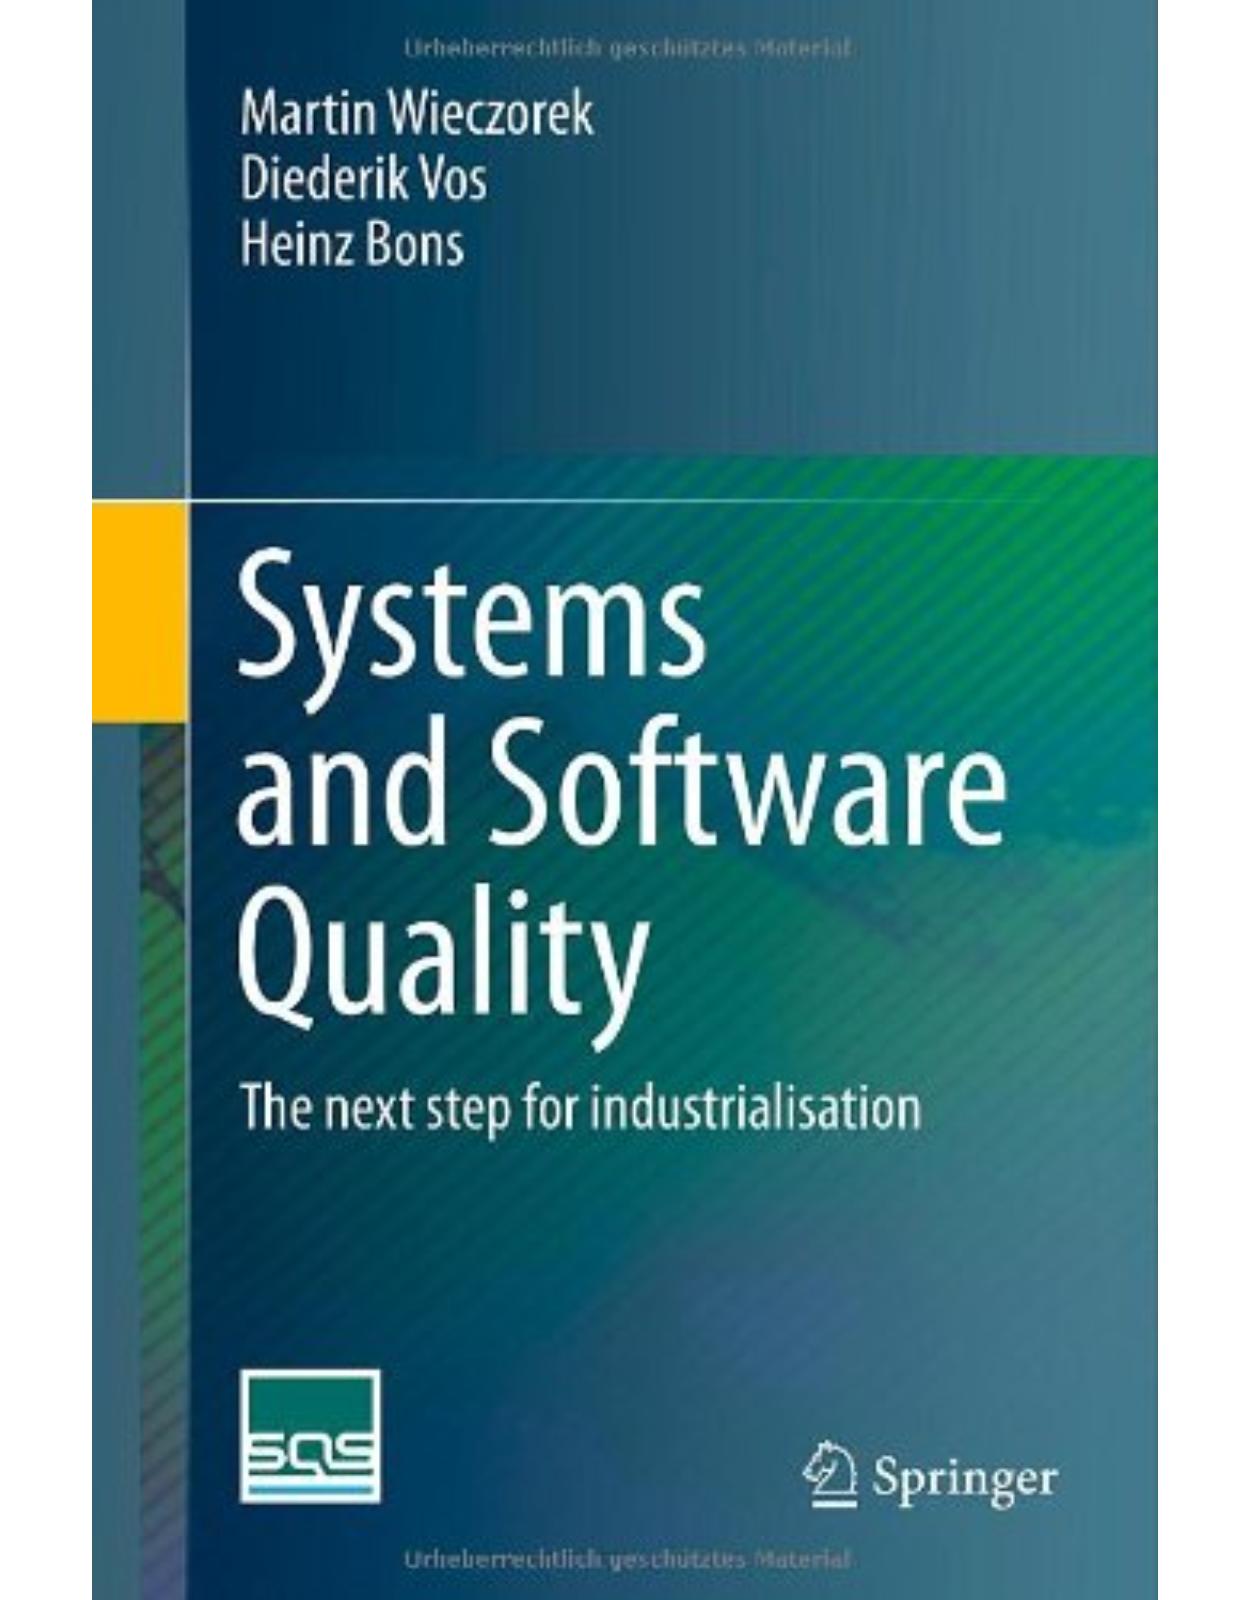 Systems and Software Quality